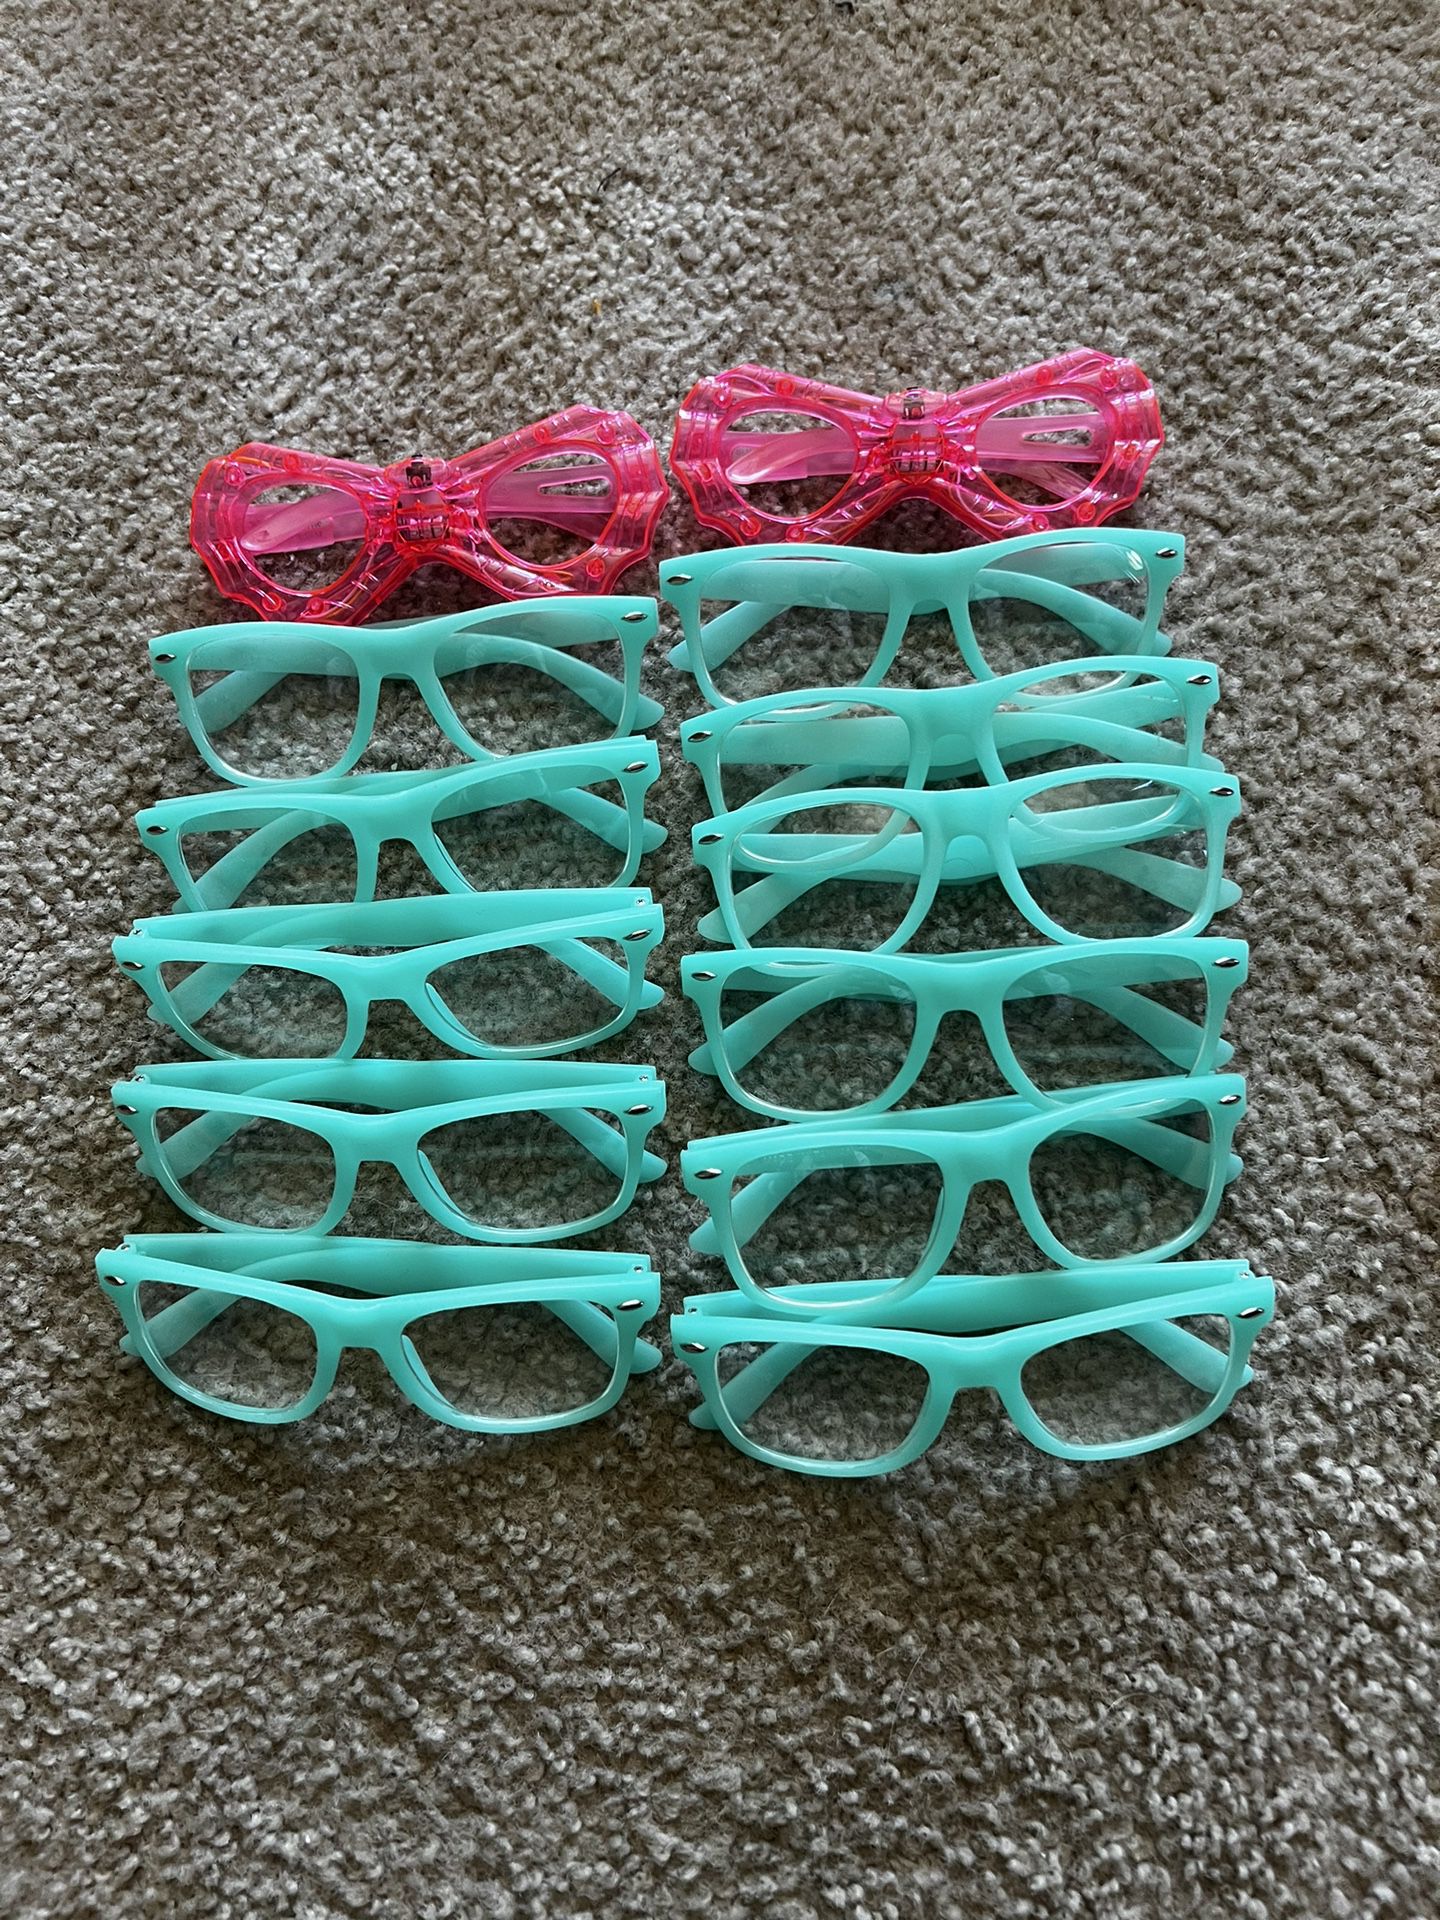 Party/event glasses included with glow sticks for free 